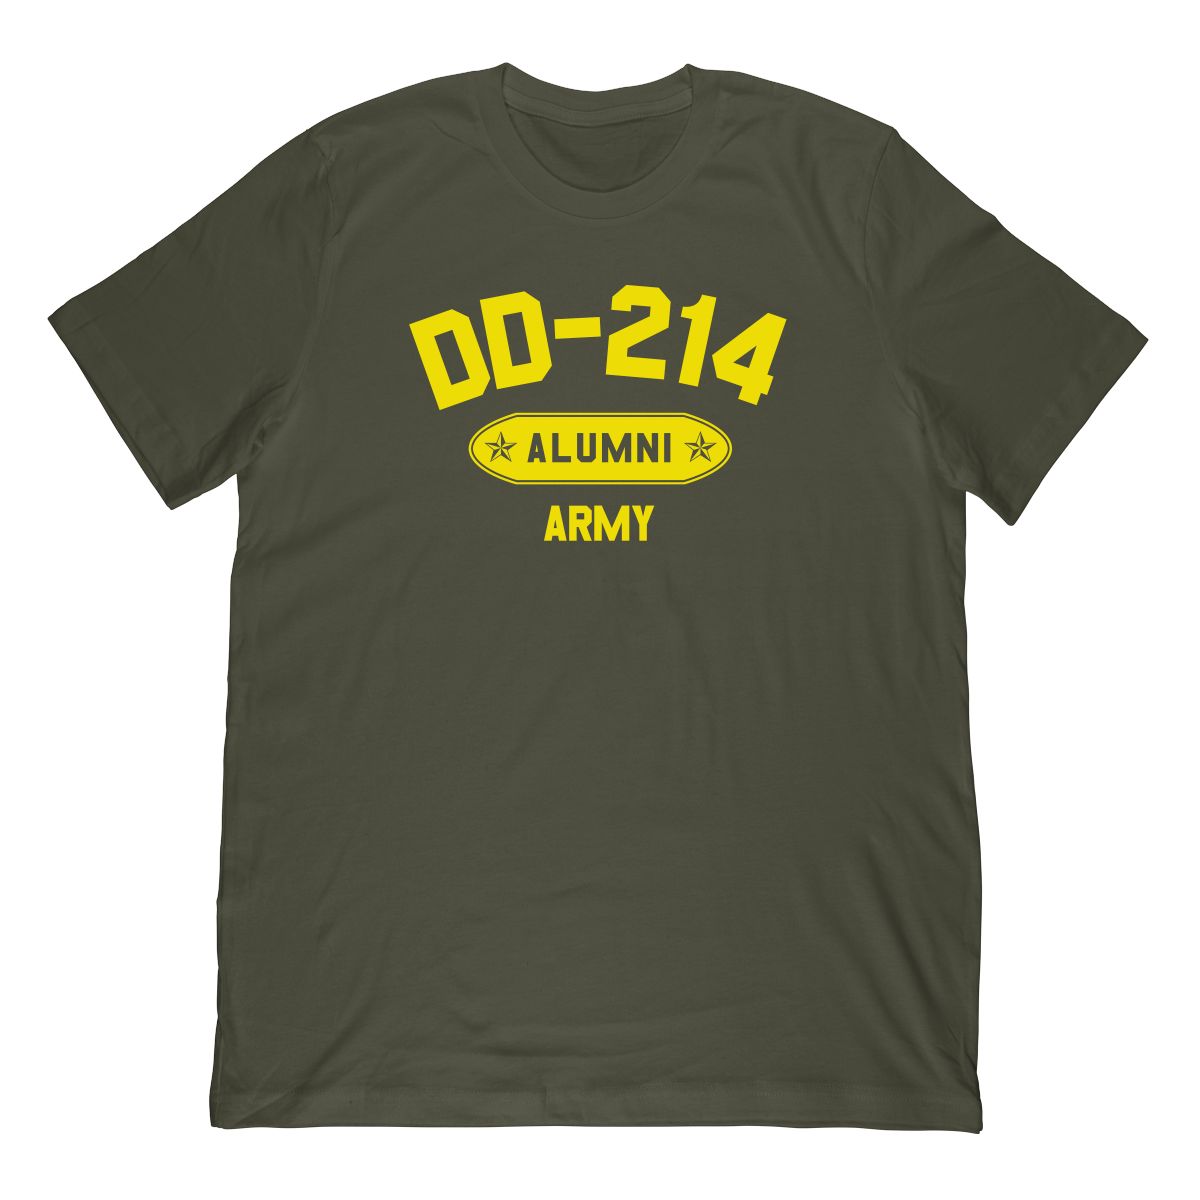 DD-214 Alumni Army In Yellow (Stamp Look) T-Shirt